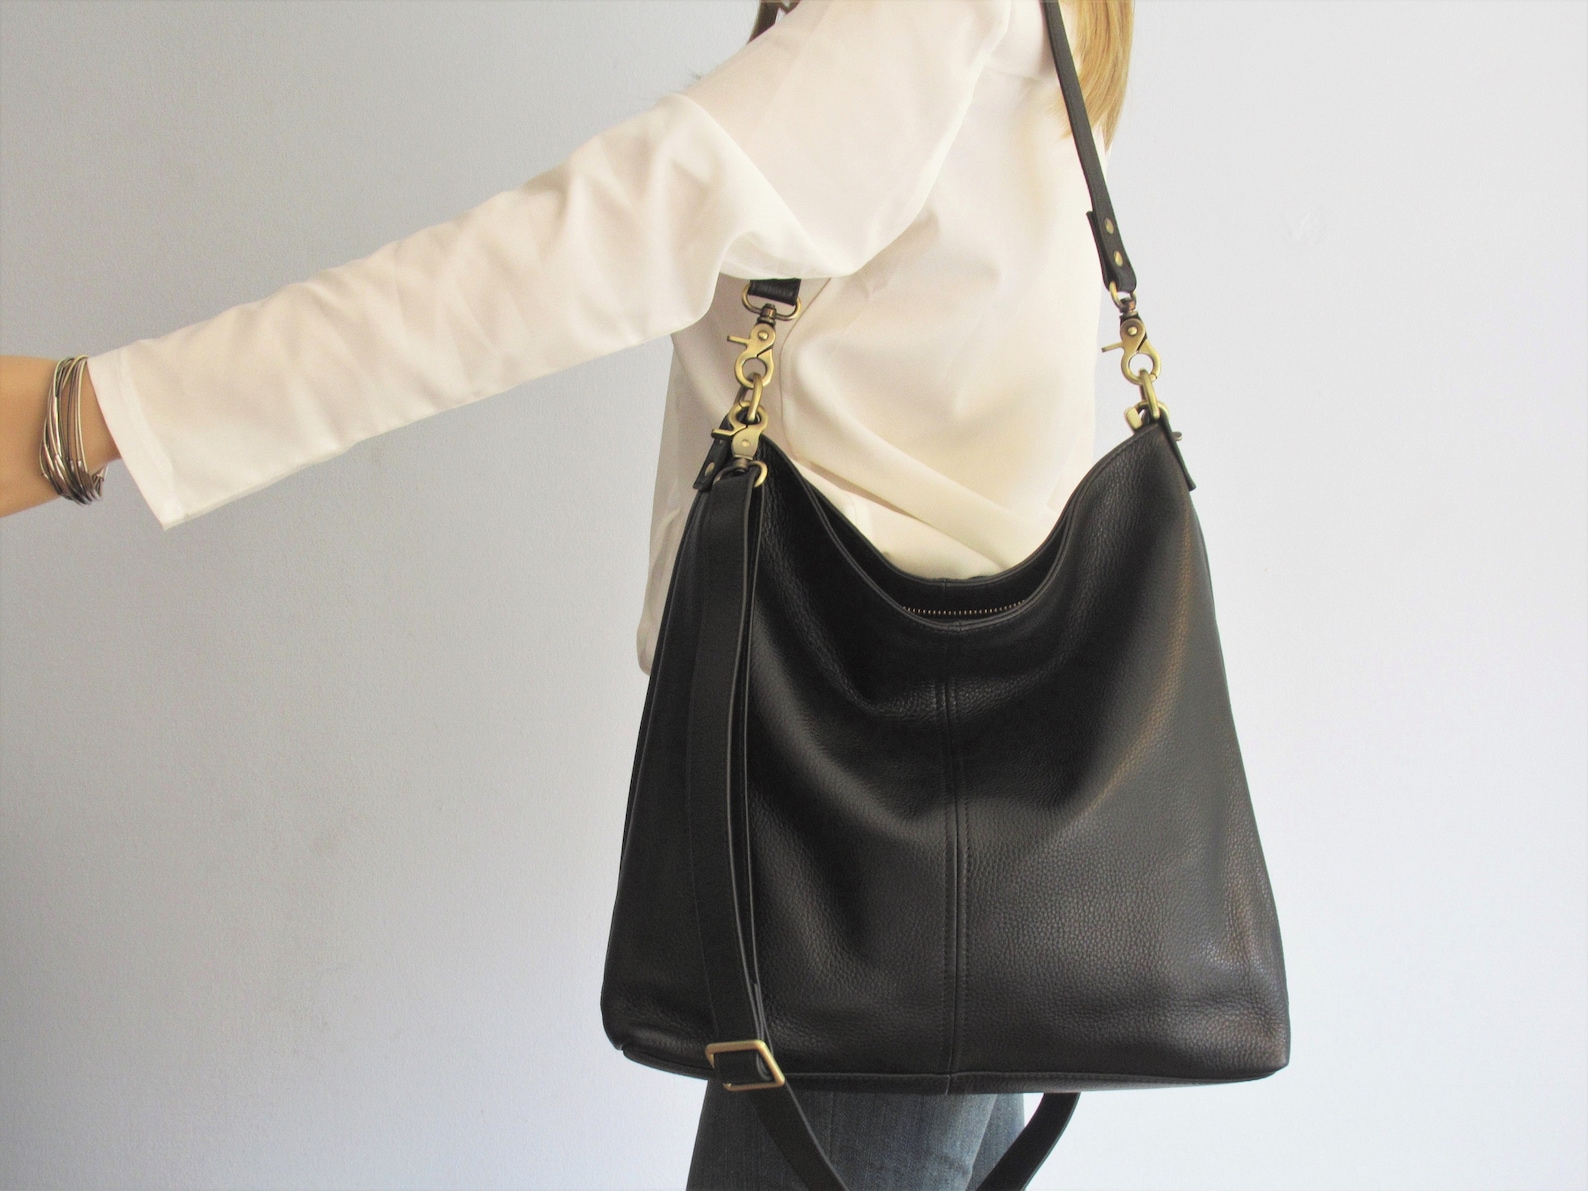 Black Leather Shoulder Bag Small Tote Leather Hobo Purse - Etsy